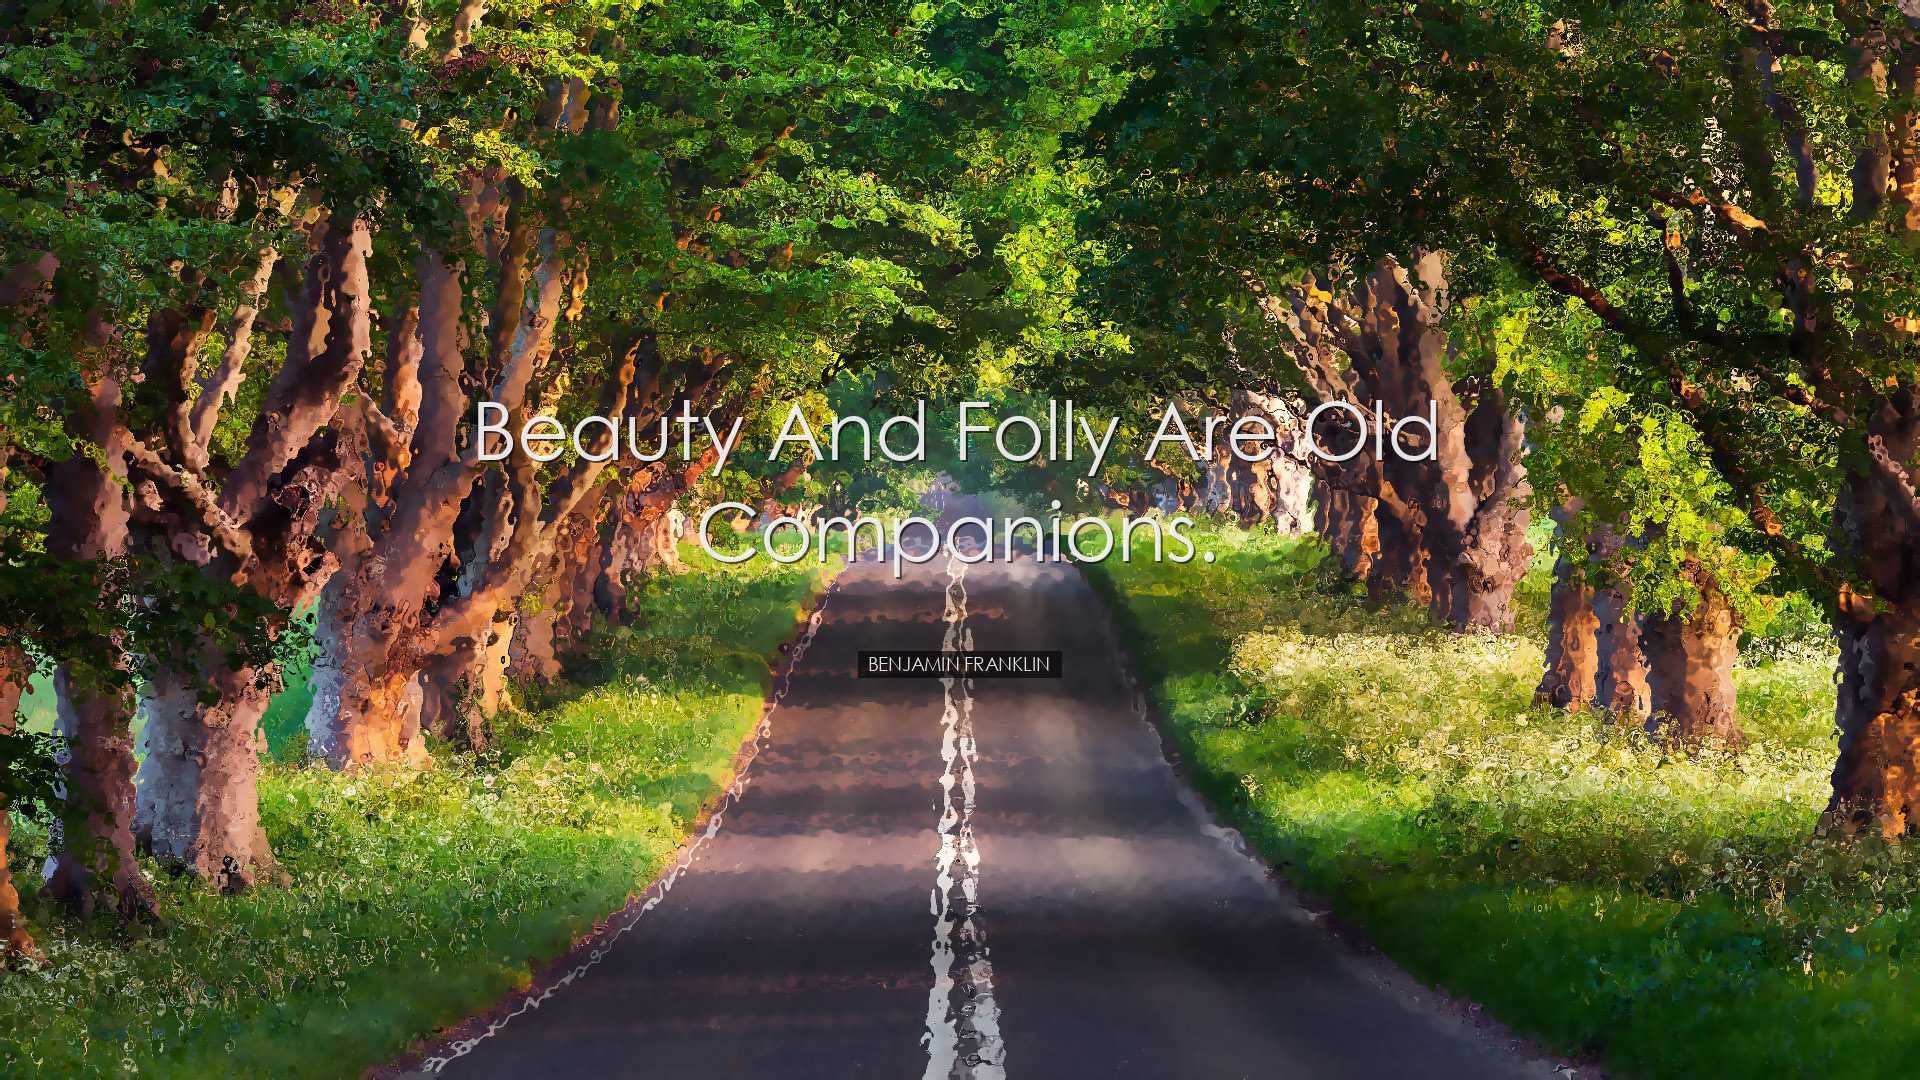 Beauty and folly are old companions. - Benjamin Franklin